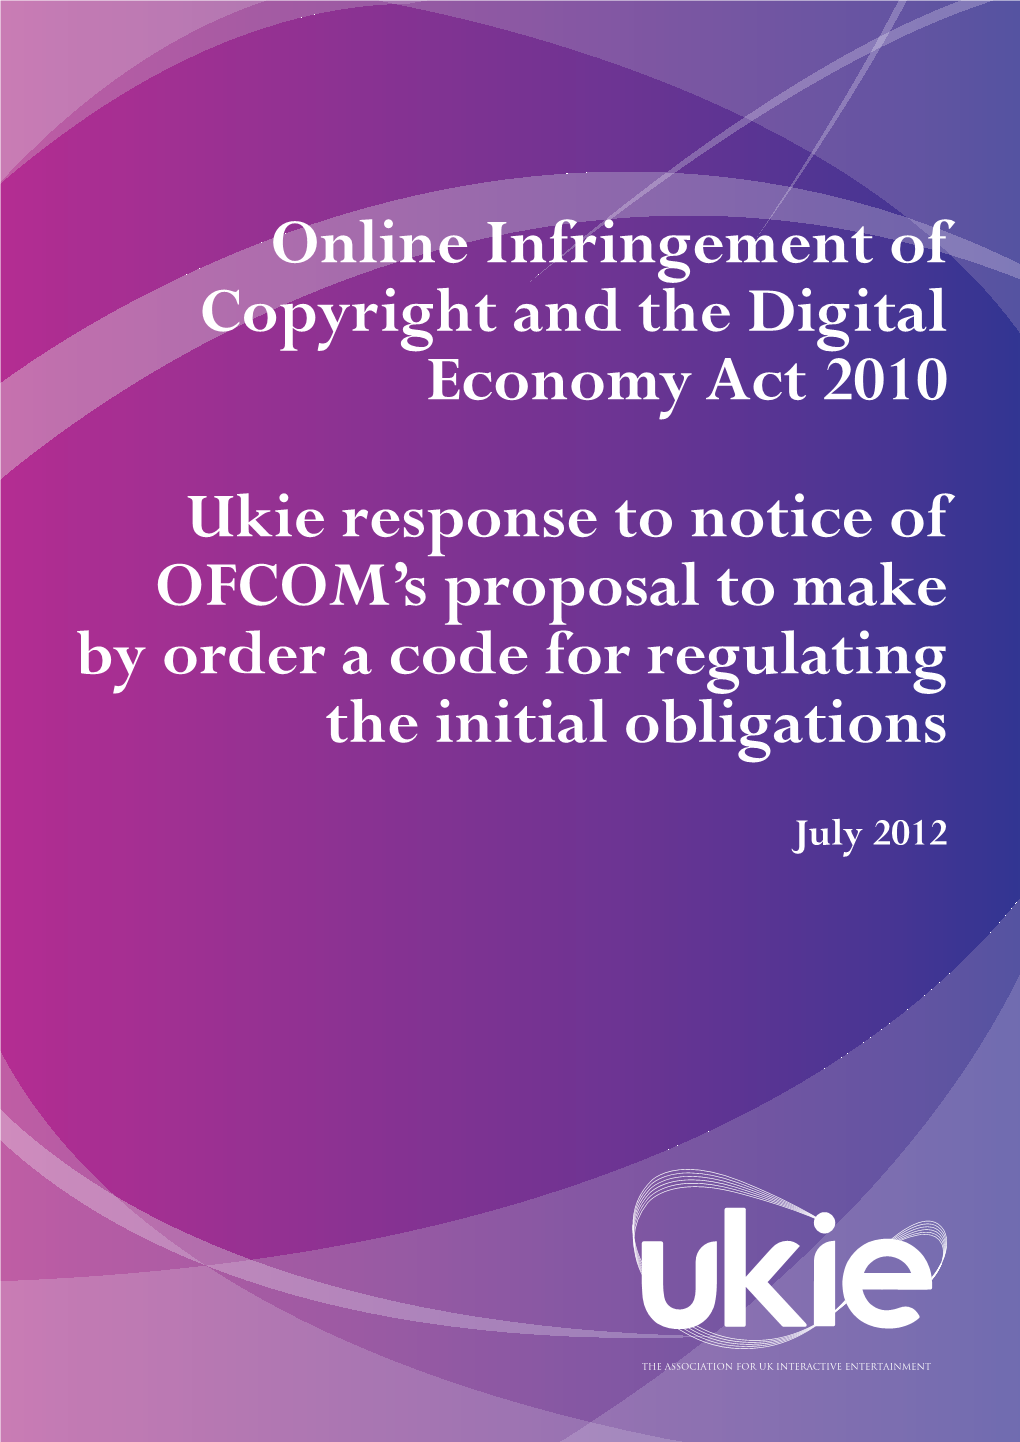 Online Infringement of Copyright and the Digital Economy Act 2010 Ukie Response to Notice of OFCOM's Proposal to Make by Order